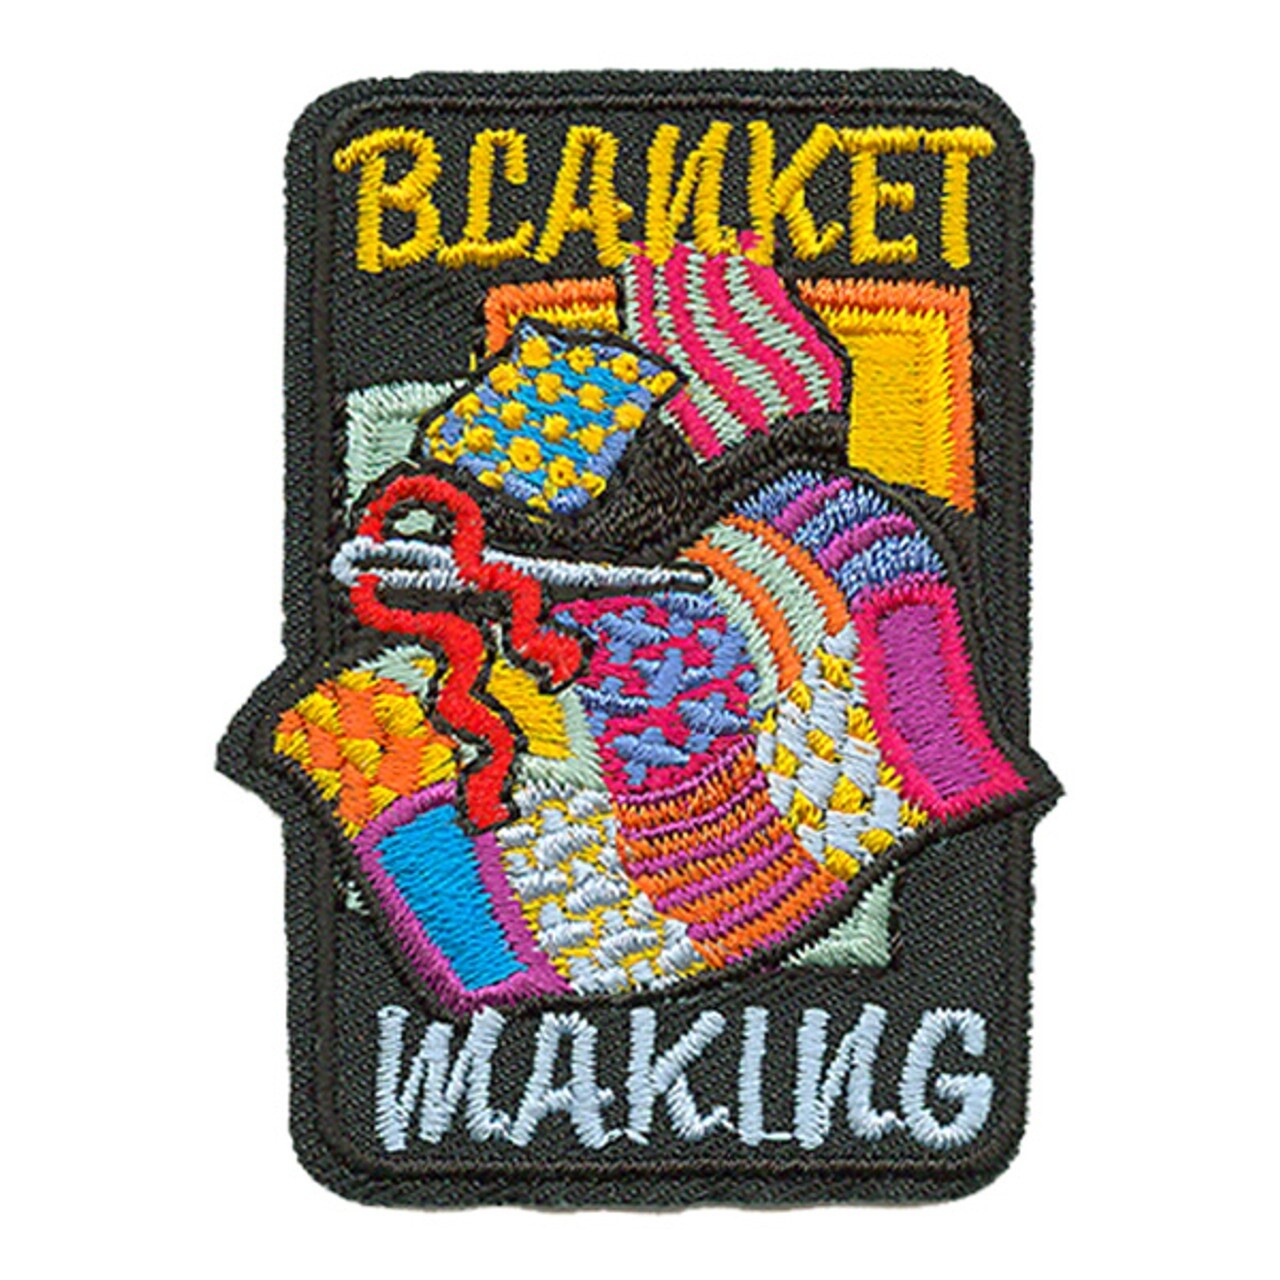 Blanket Making Patch